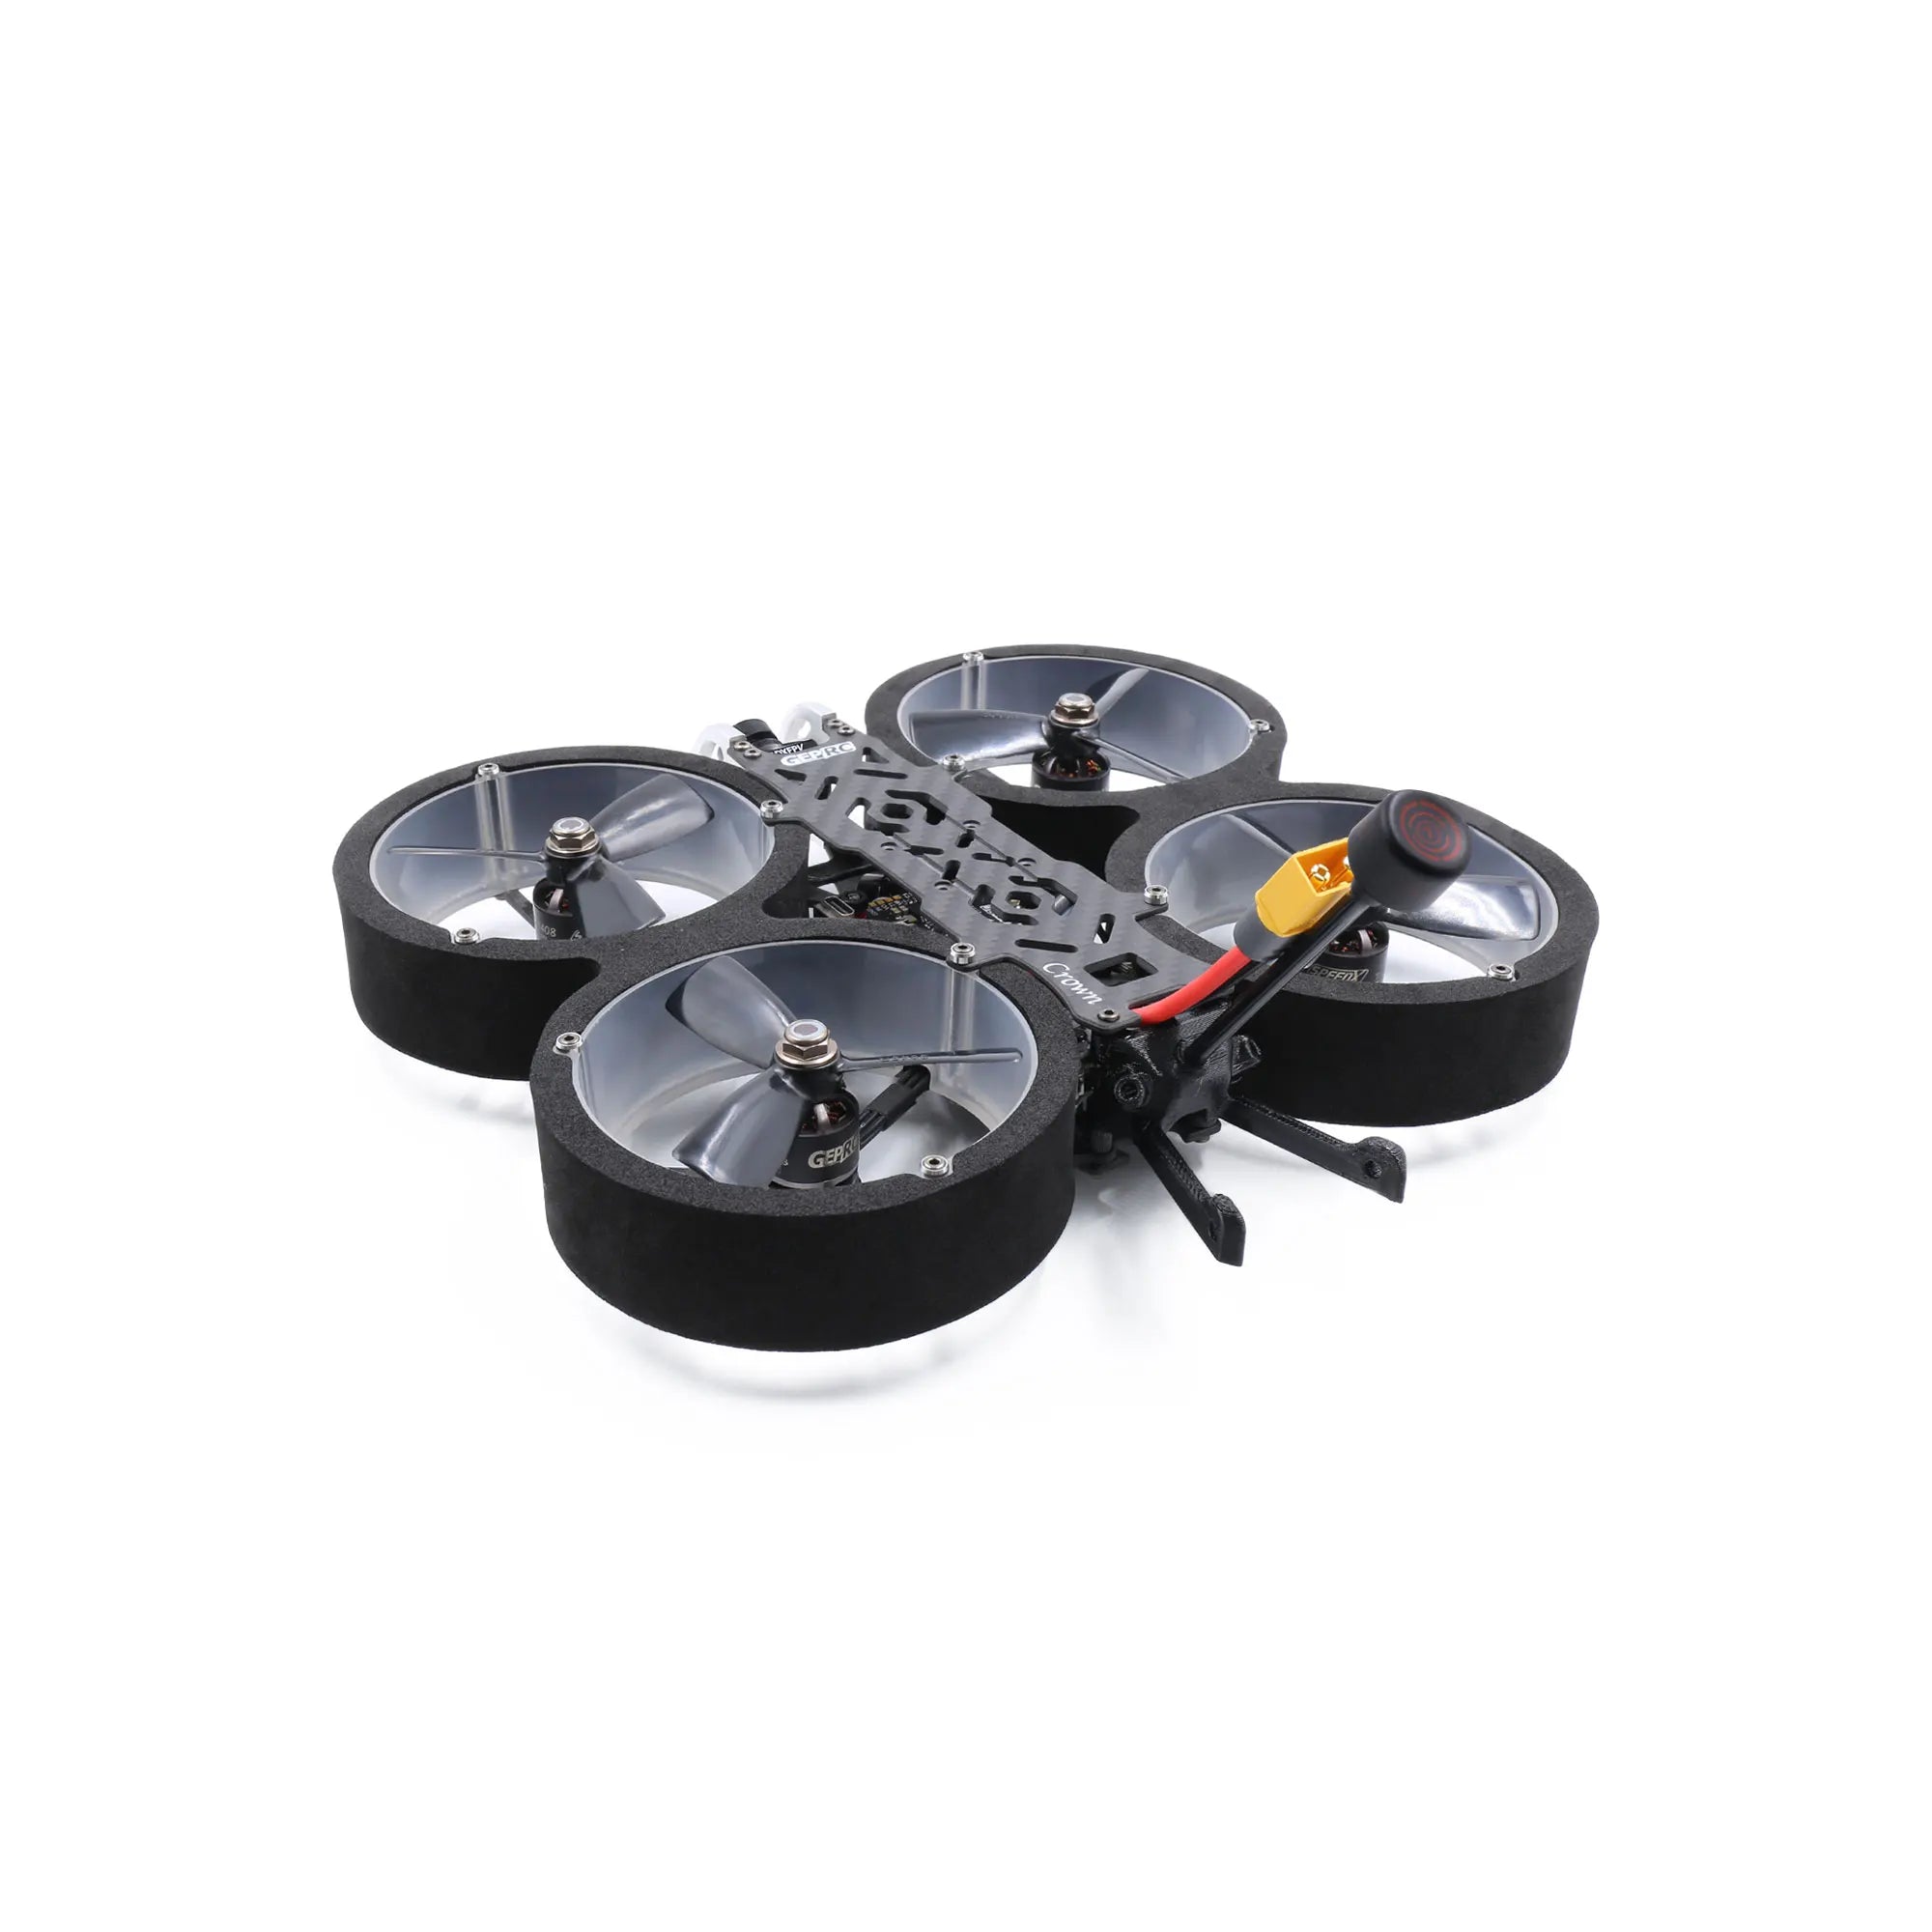 GEPRC Crown HD Cinewhoop FPV Drone, GEPRC Crown can be equipped with GoPro6/7/8/9 motion camera 